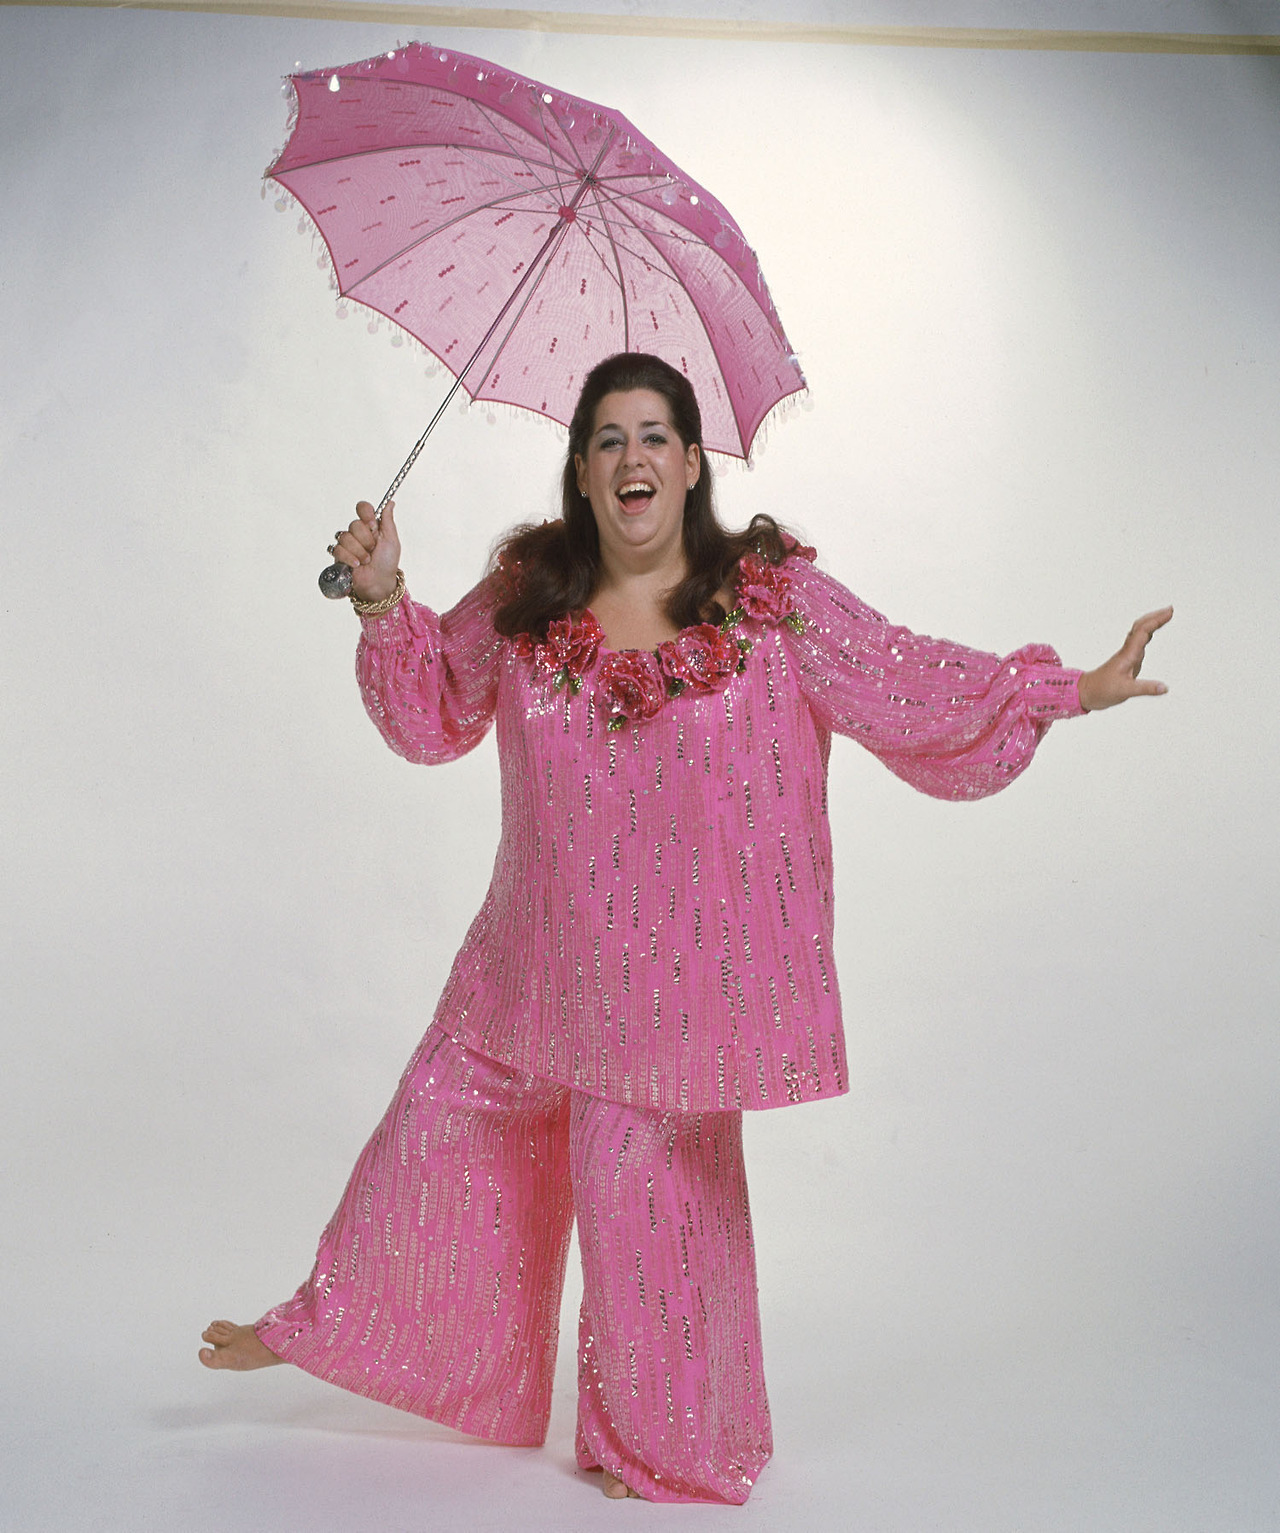 Cass Elliot On Her Television Variety Special